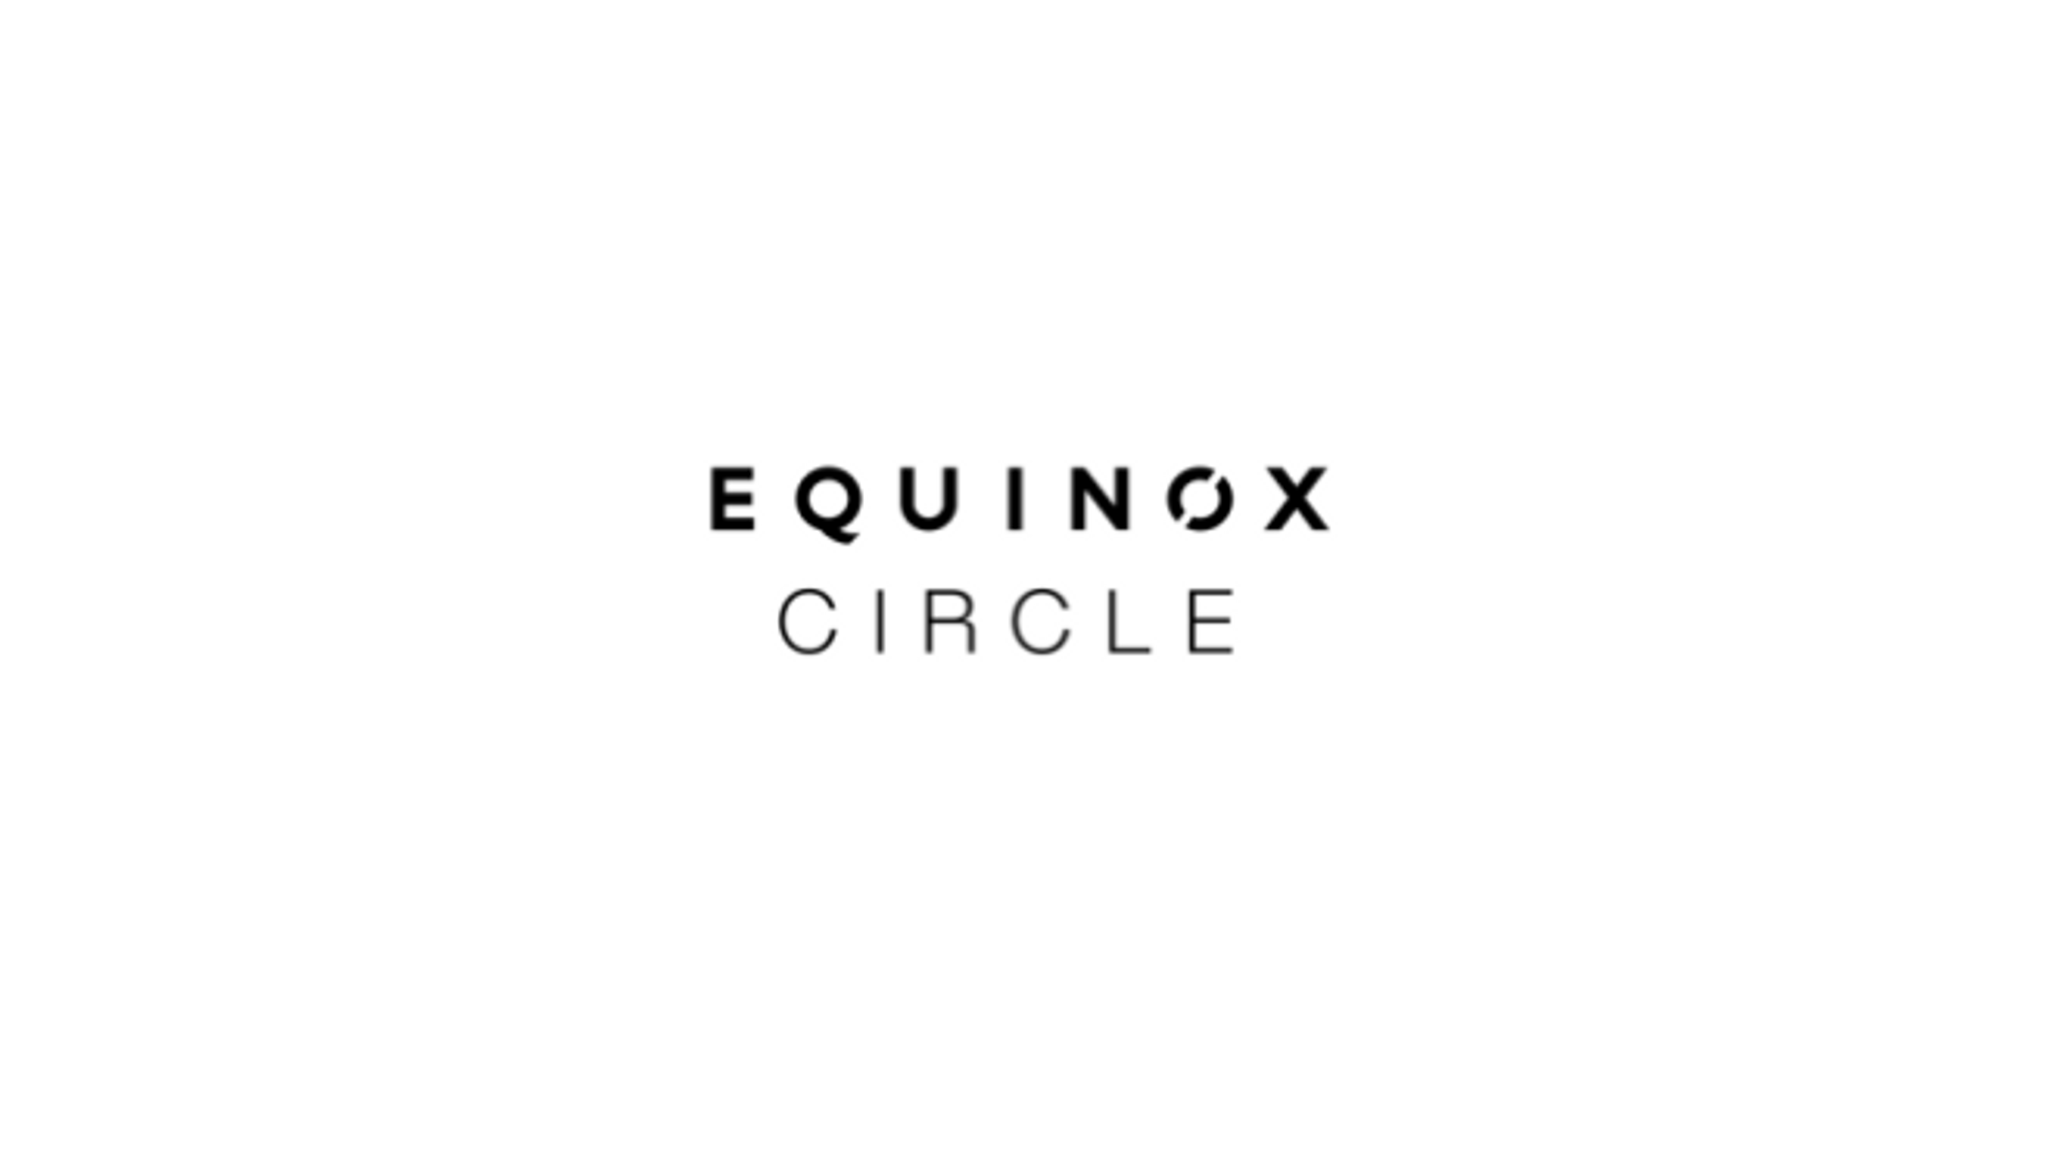 Equinox caters to luxury market with members program